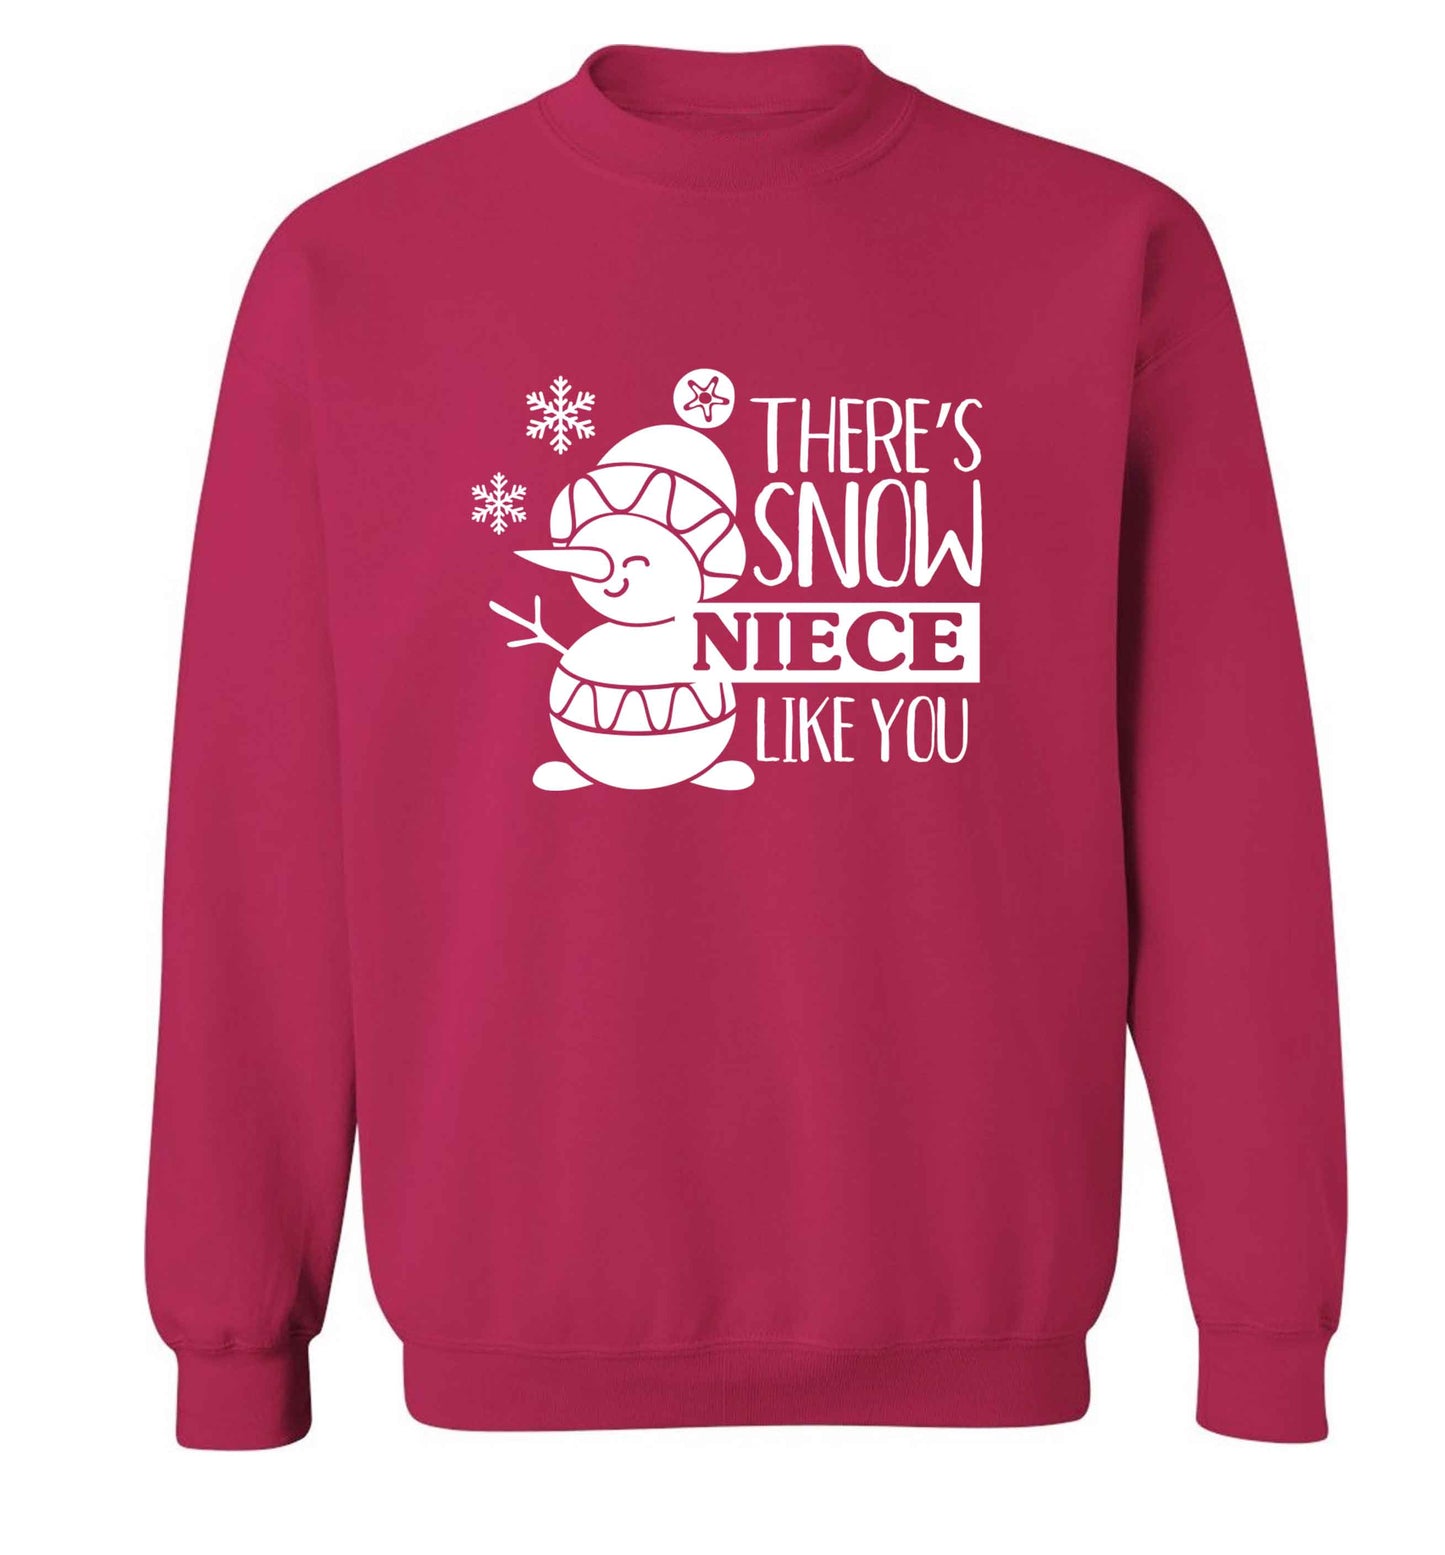 There's snow niece like you adult's unisex pink sweater 2XL